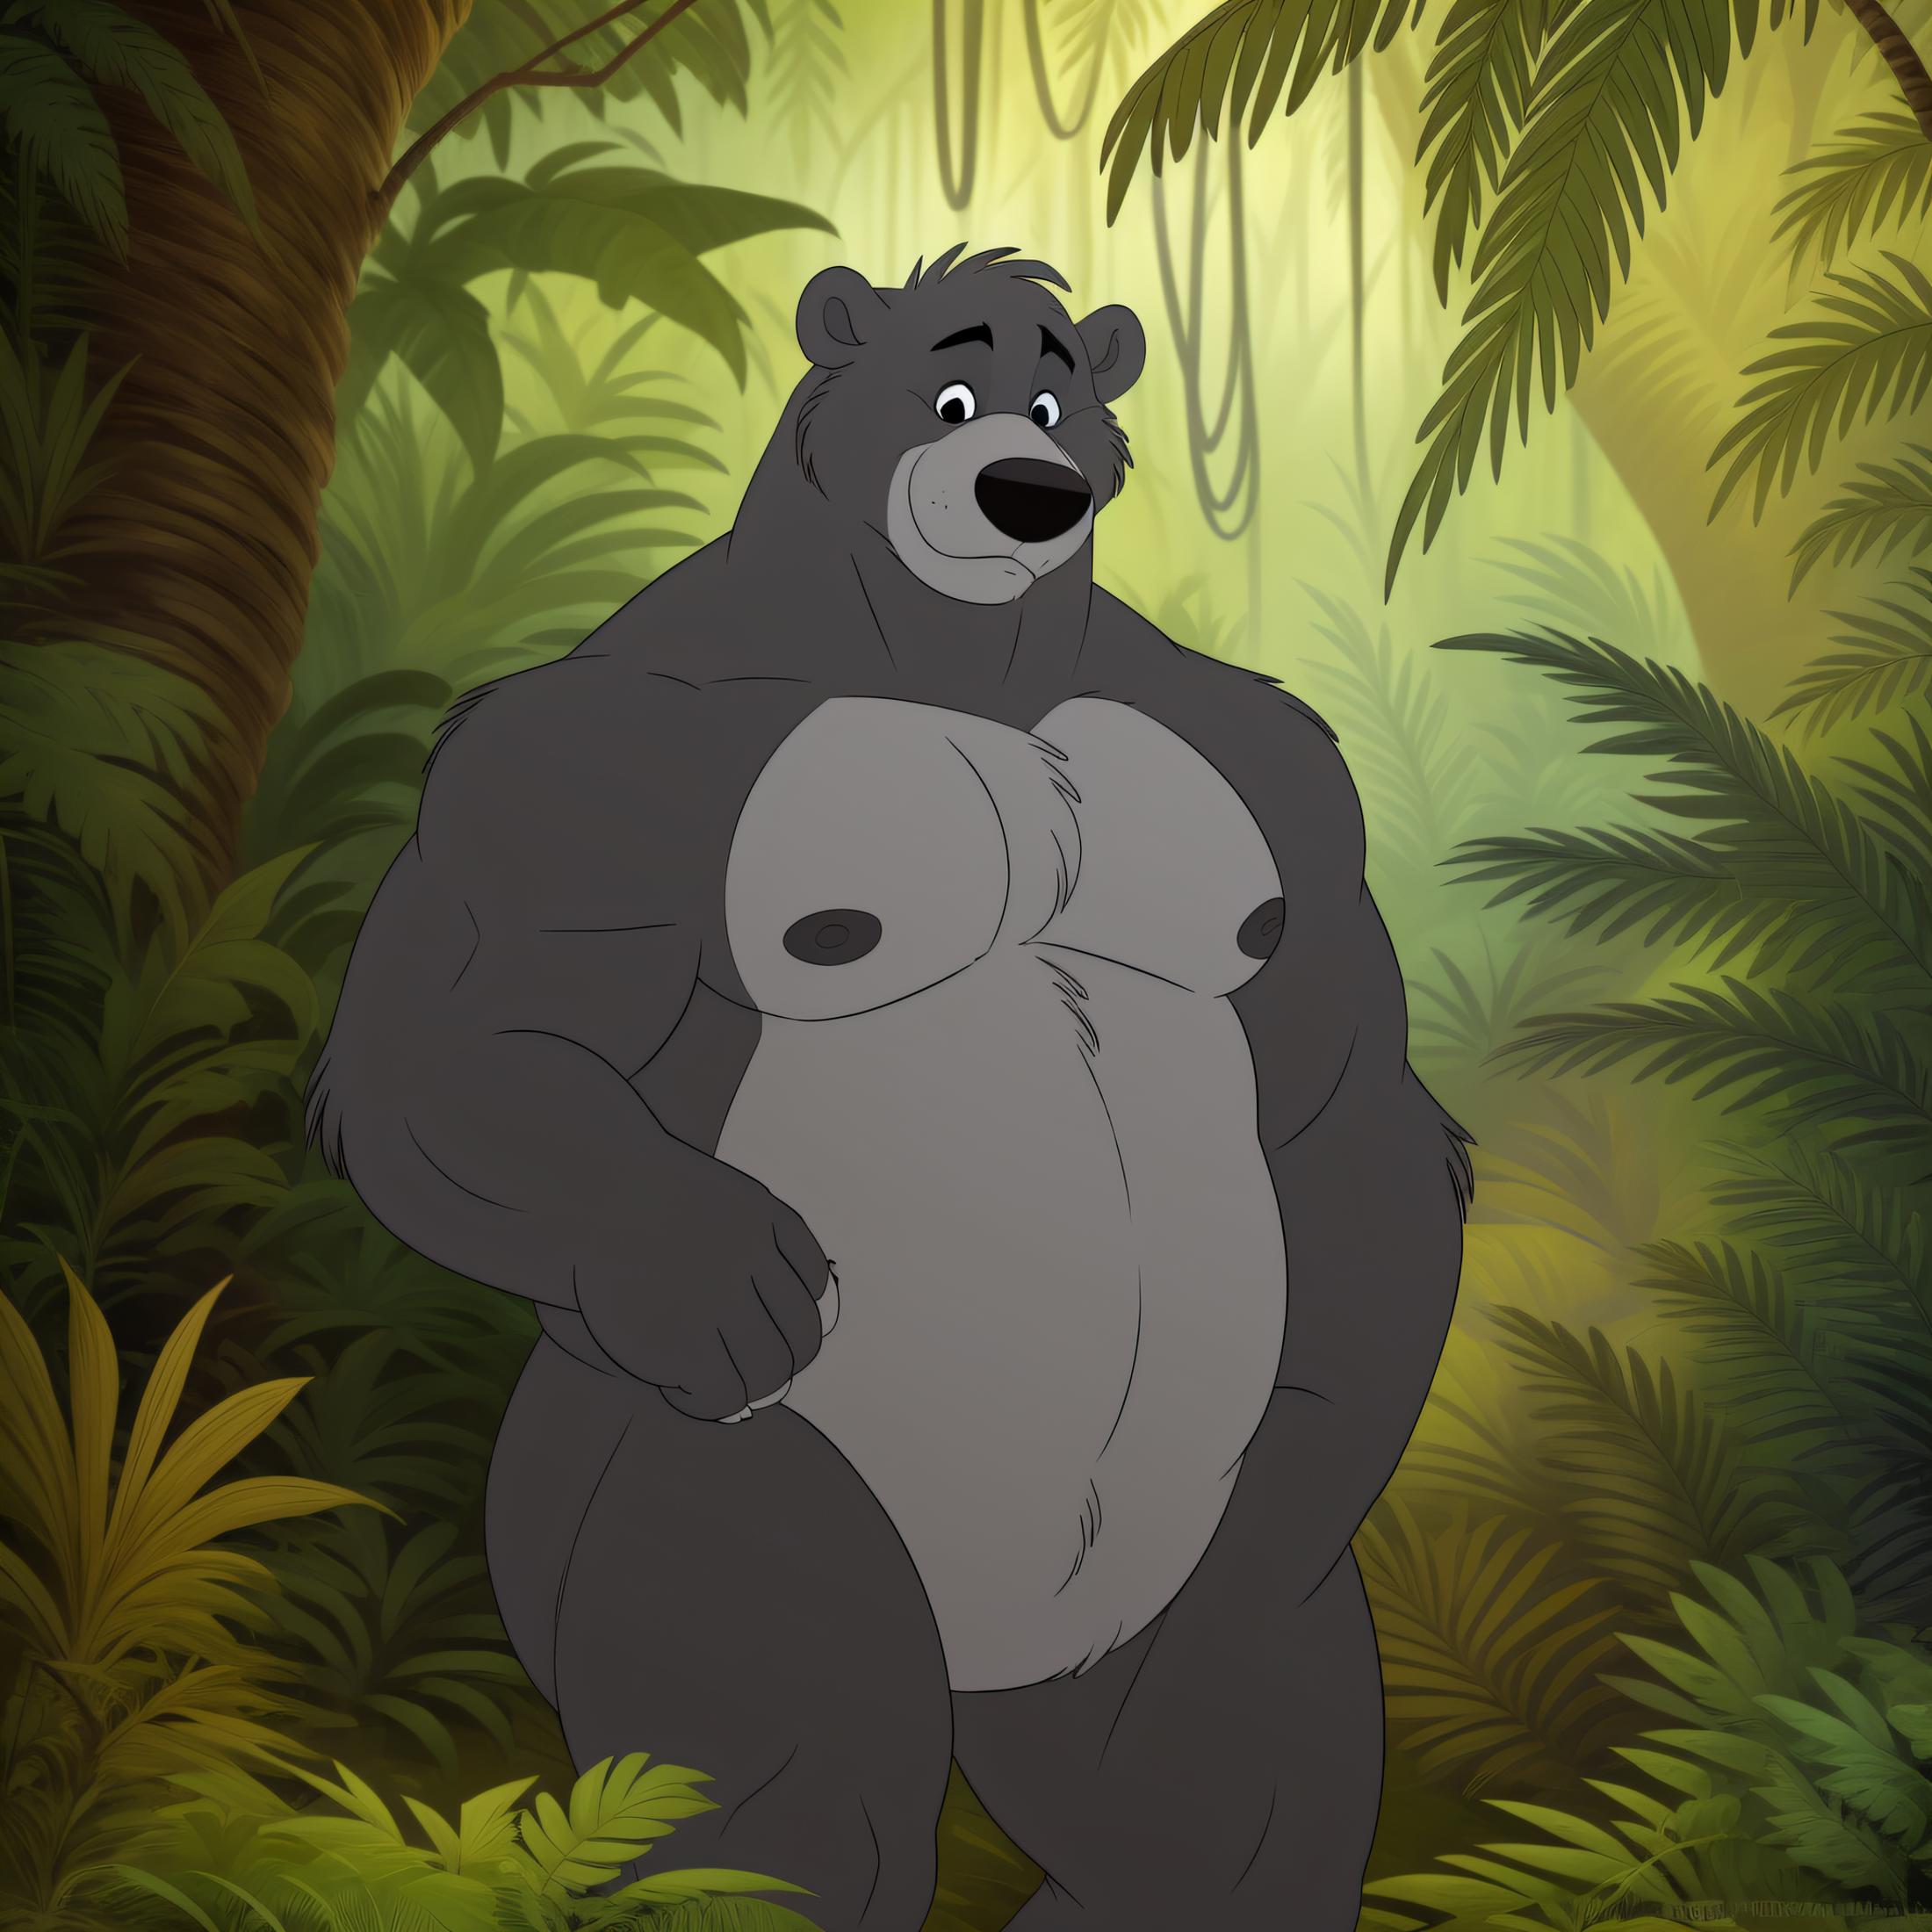 Baloo [ The Jungle Book ] image by TheGooder